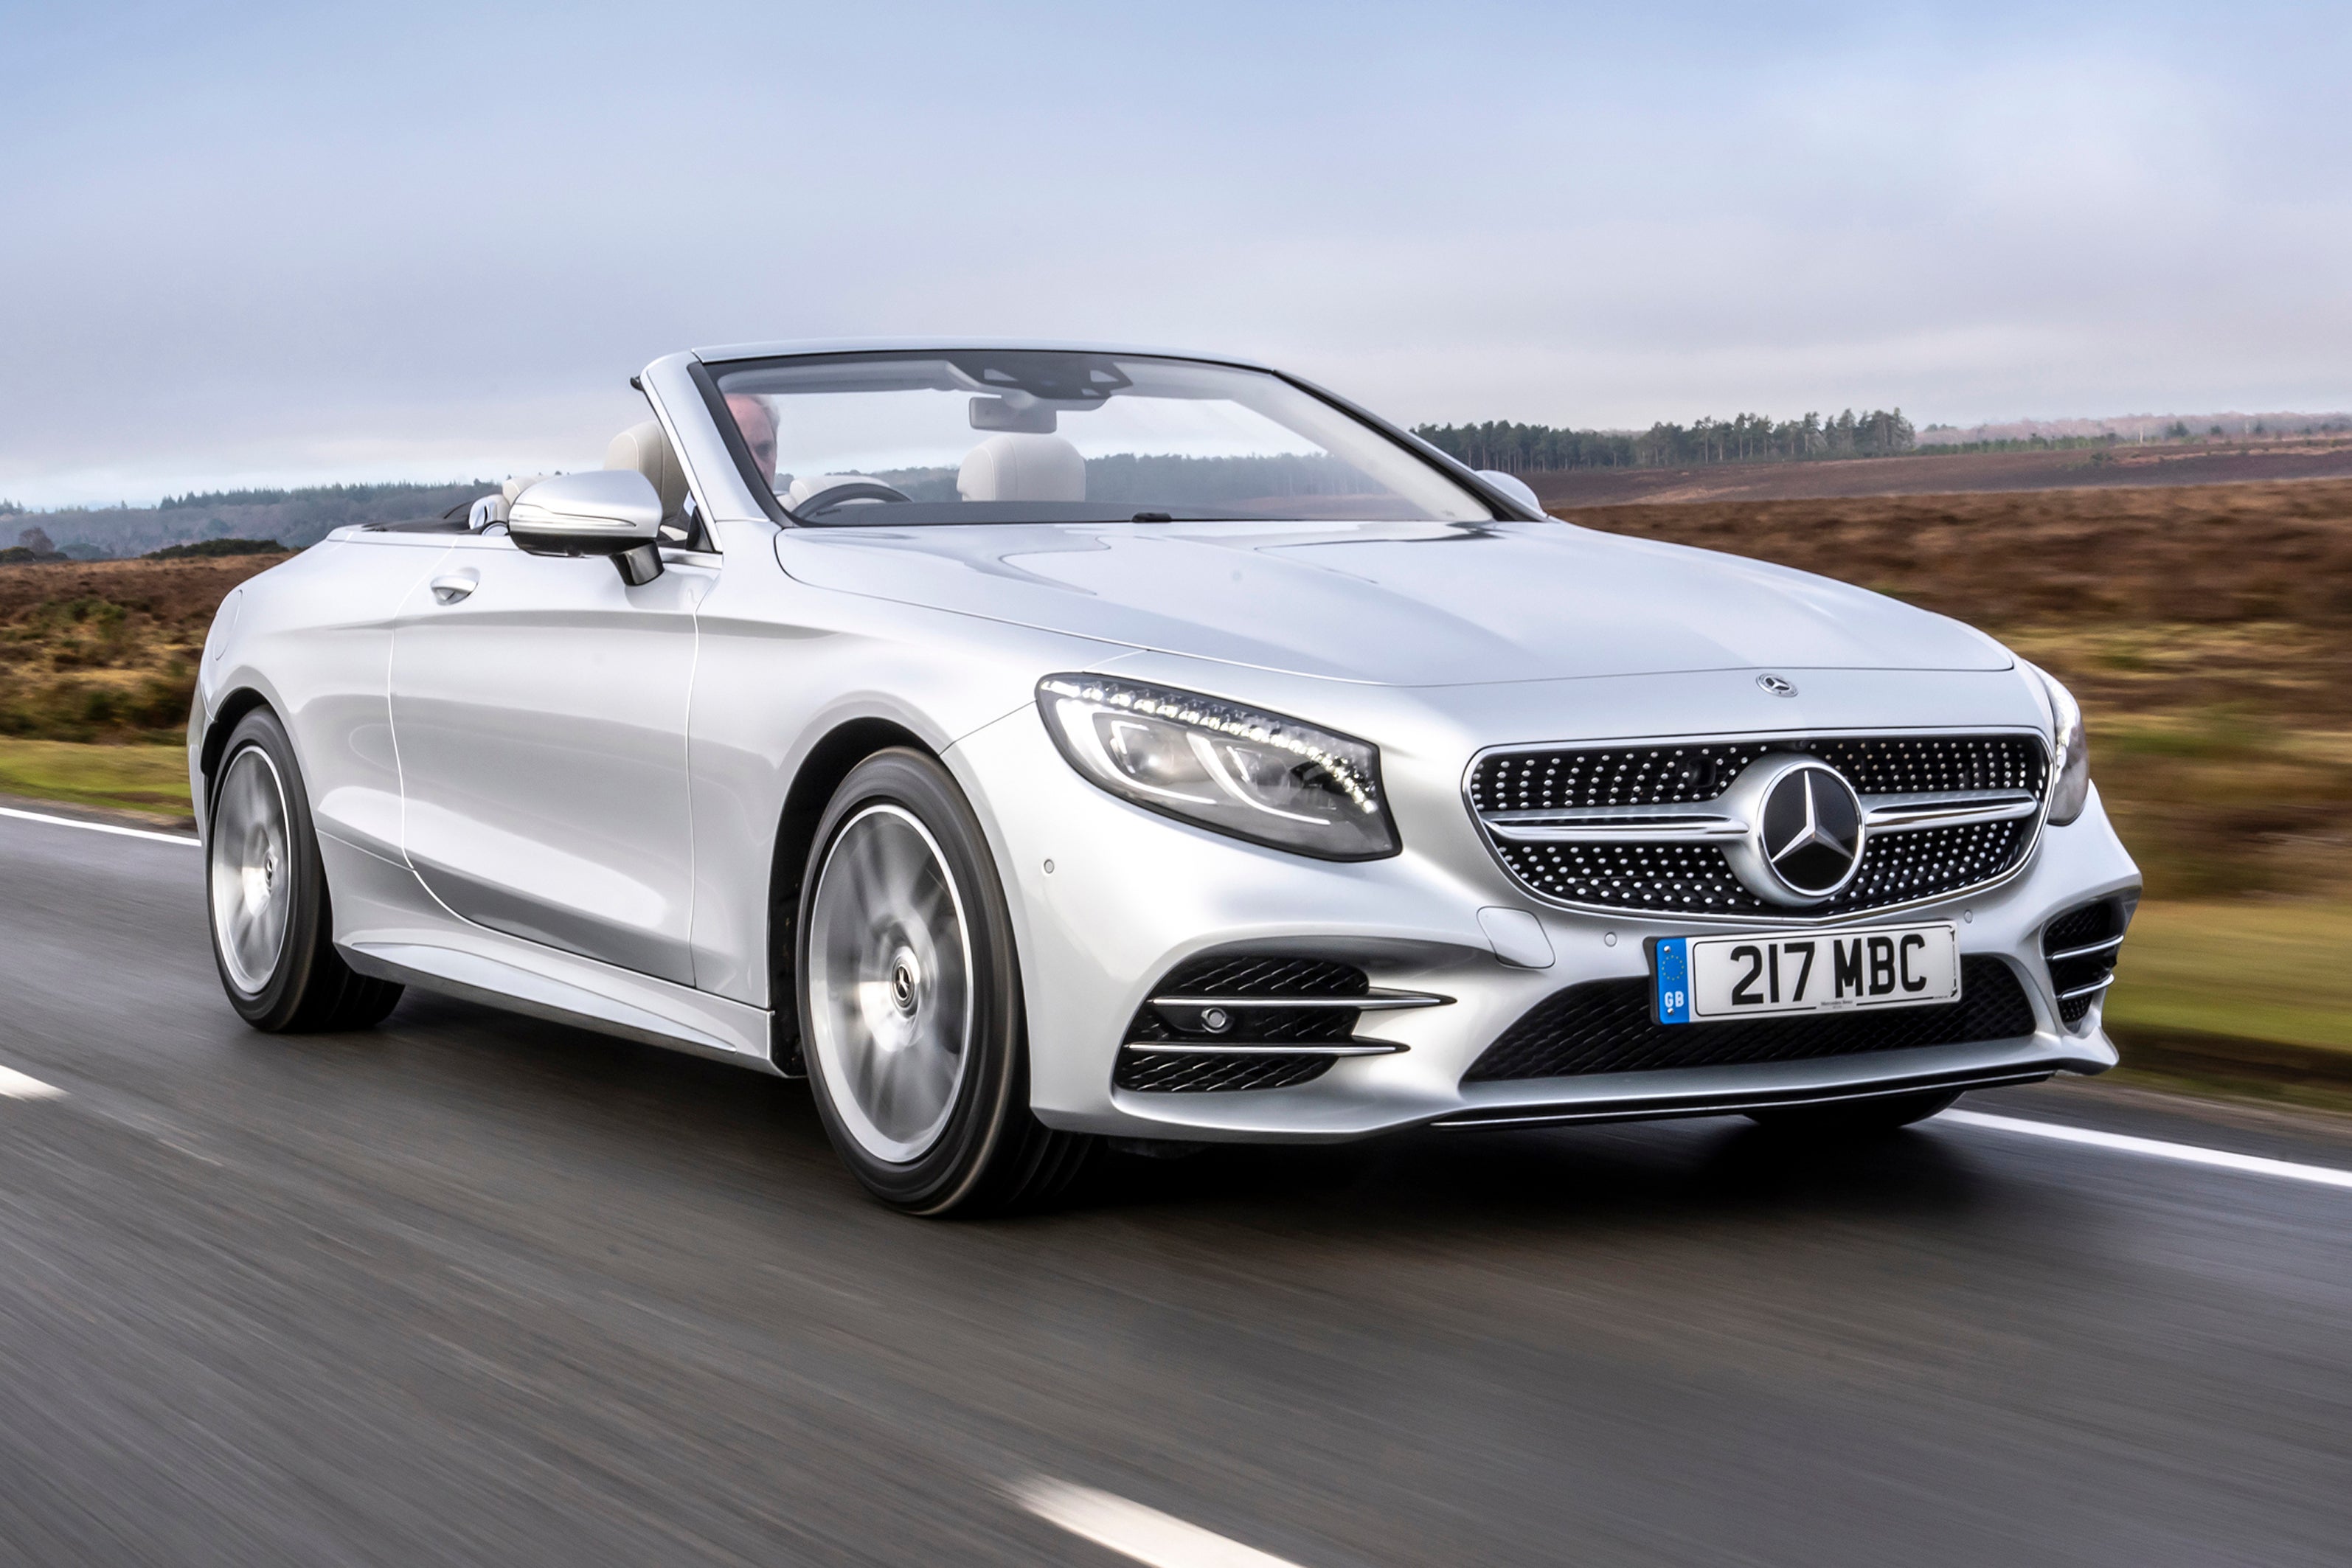 Mercedes-Benz S-Class Cabriolet (2016-2021) Review: exterior front three quarter photo of the Mercedes Benz S-Class Cabriolet on the road